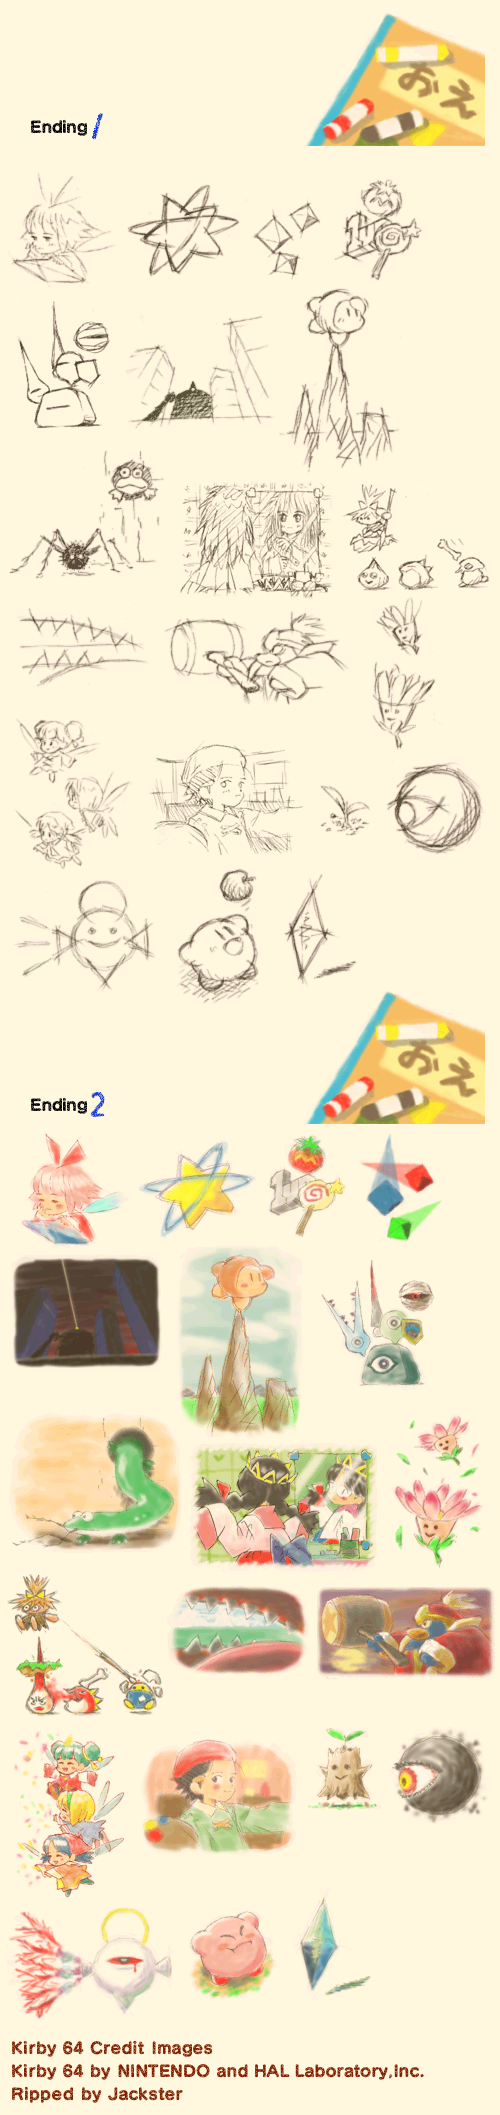 Ending Sketches